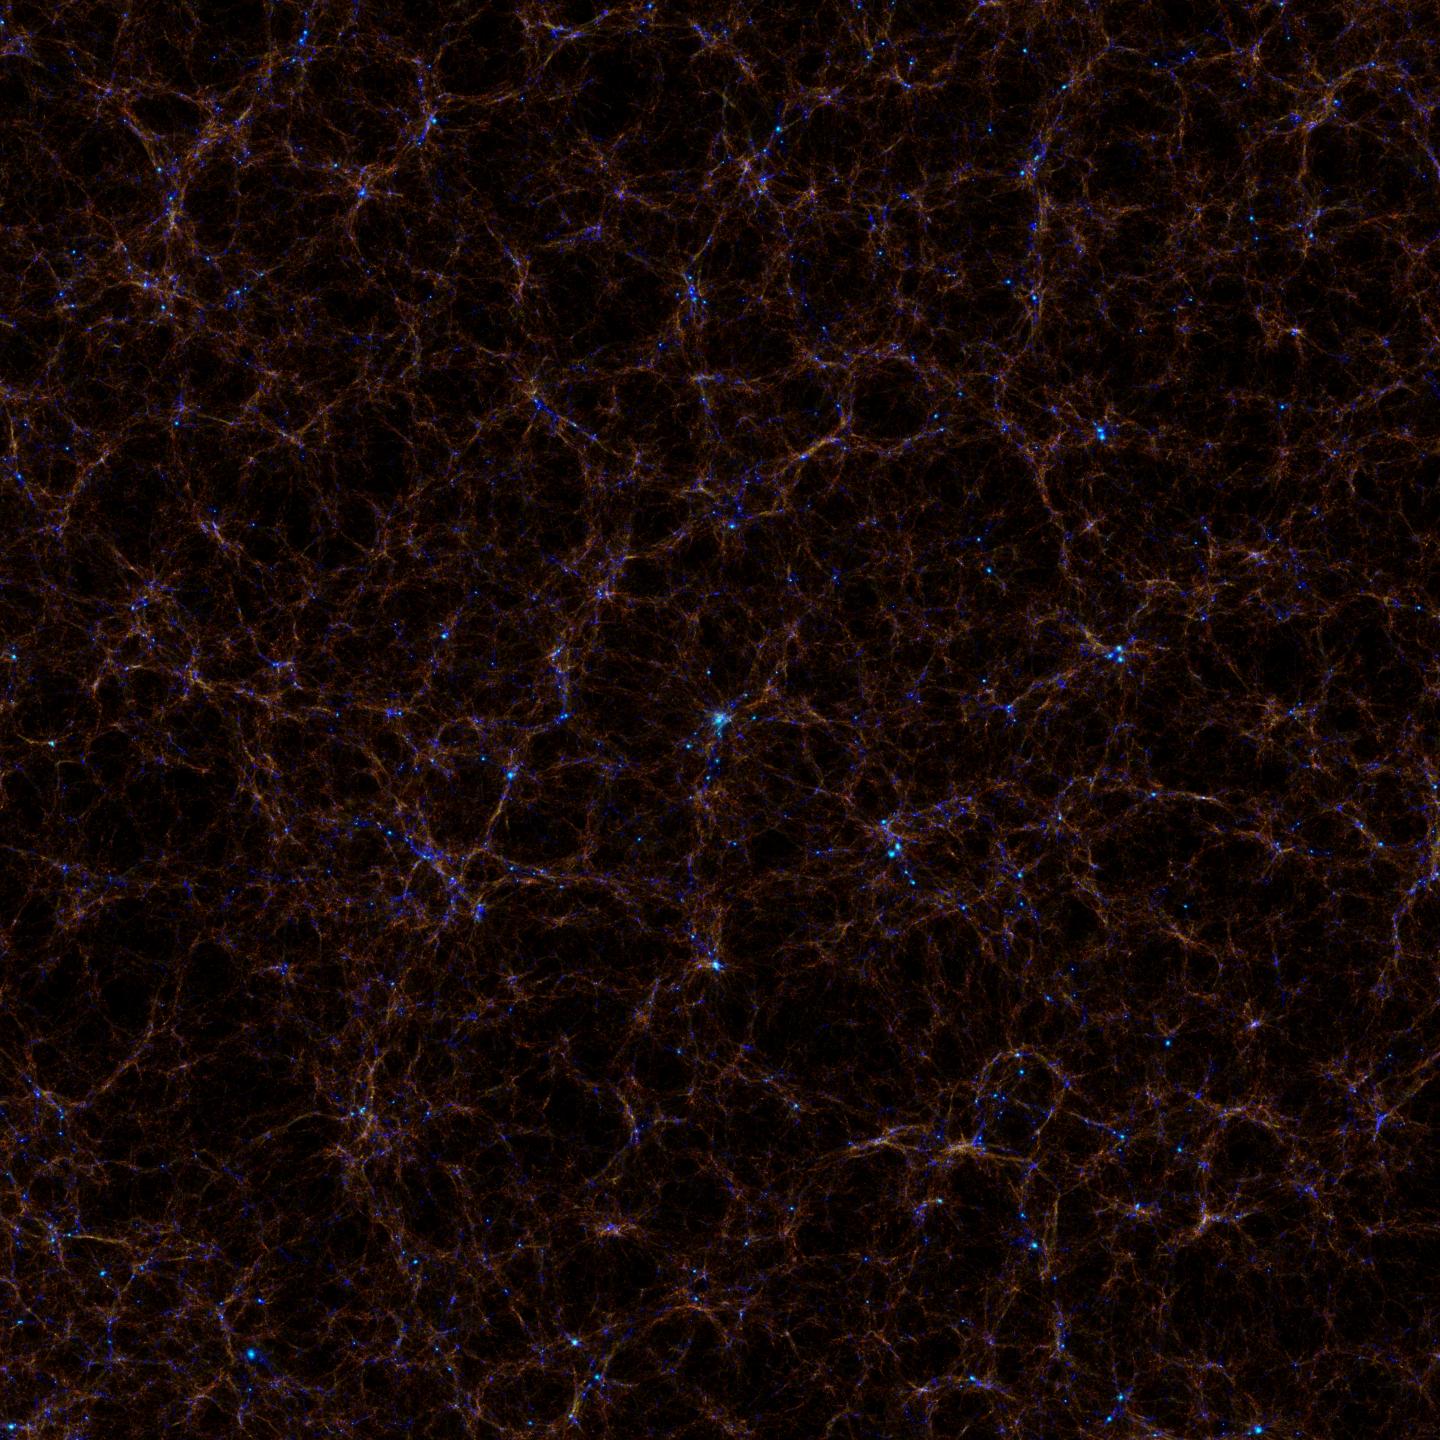 Simulation of the Visible Structures of the Universe by the Magneticum Pathfinder Project